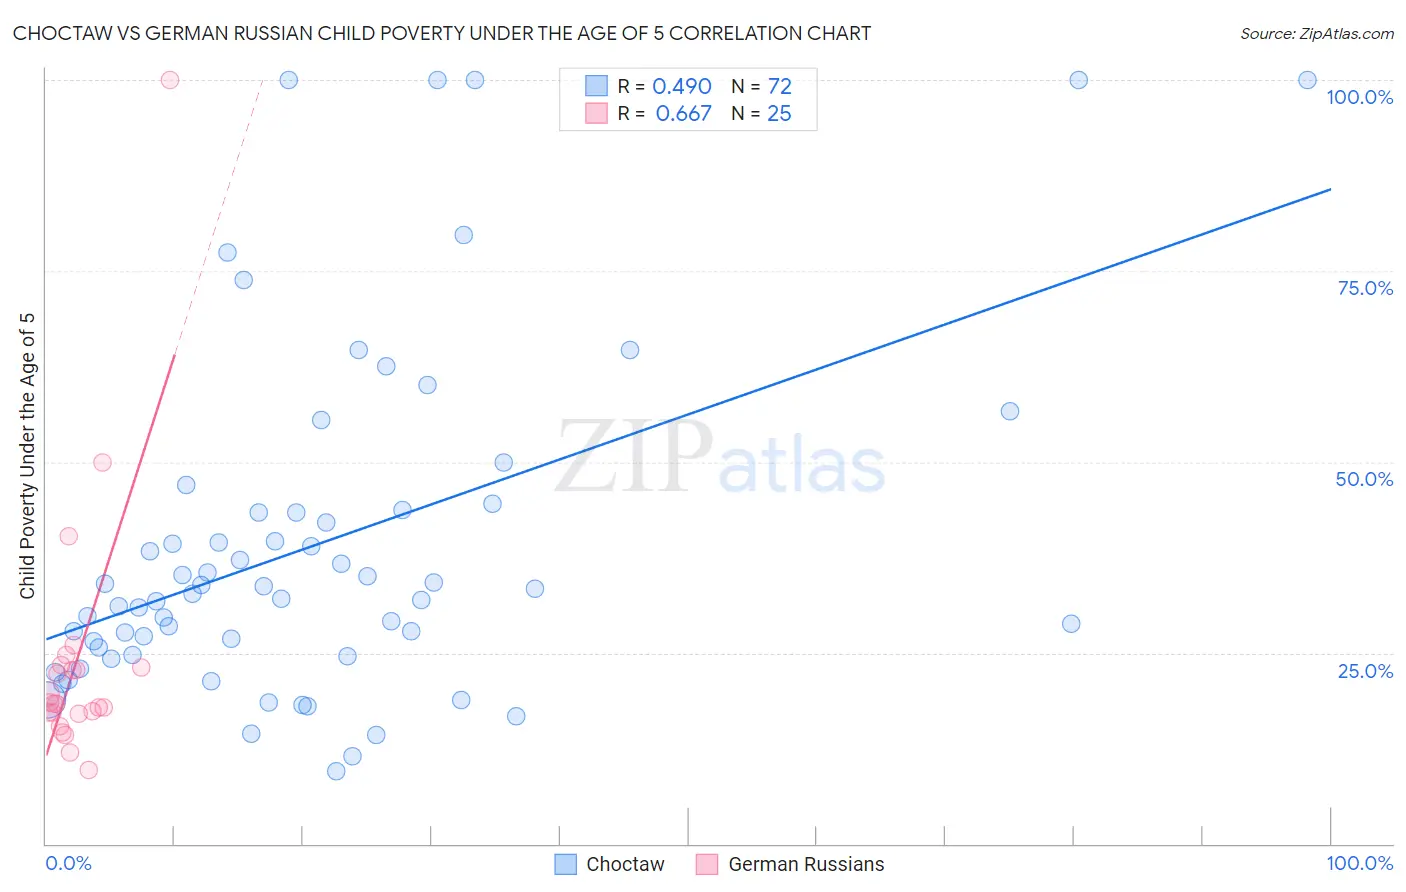 Choctaw vs German Russian Child Poverty Under the Age of 5